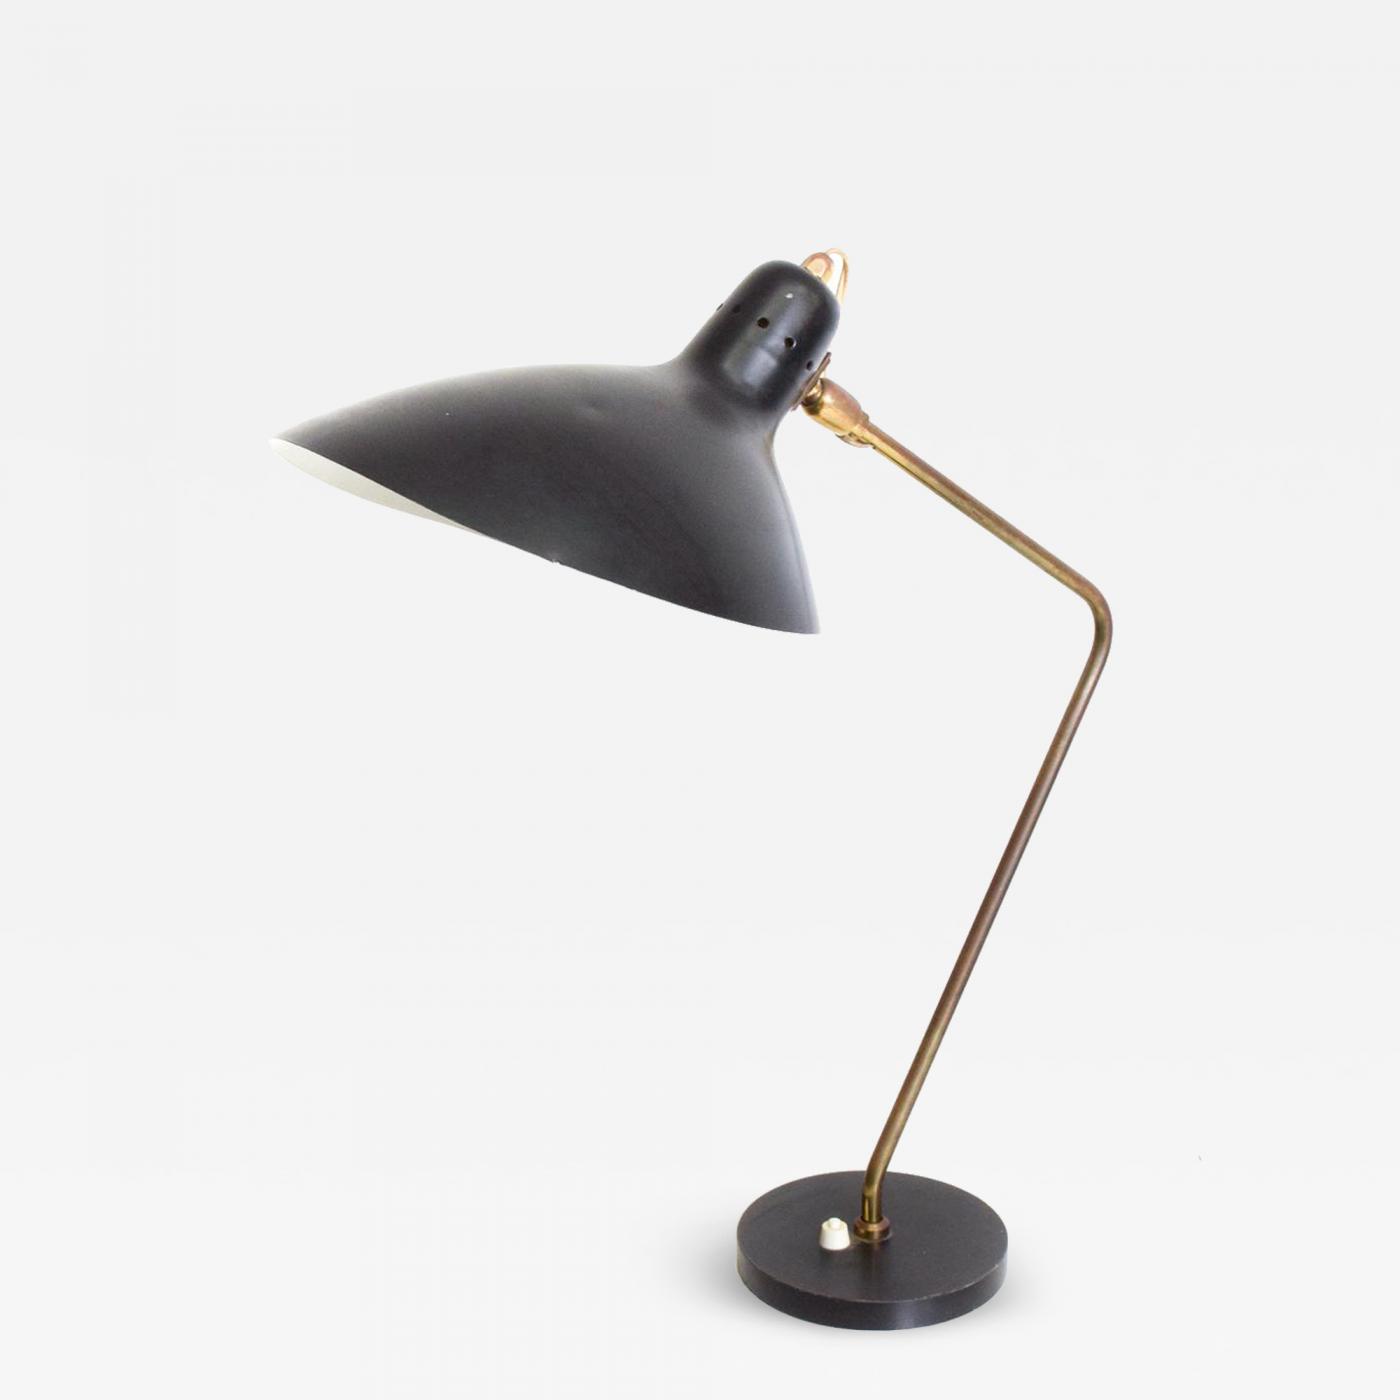 What Should I Look For In A Desk Lamp